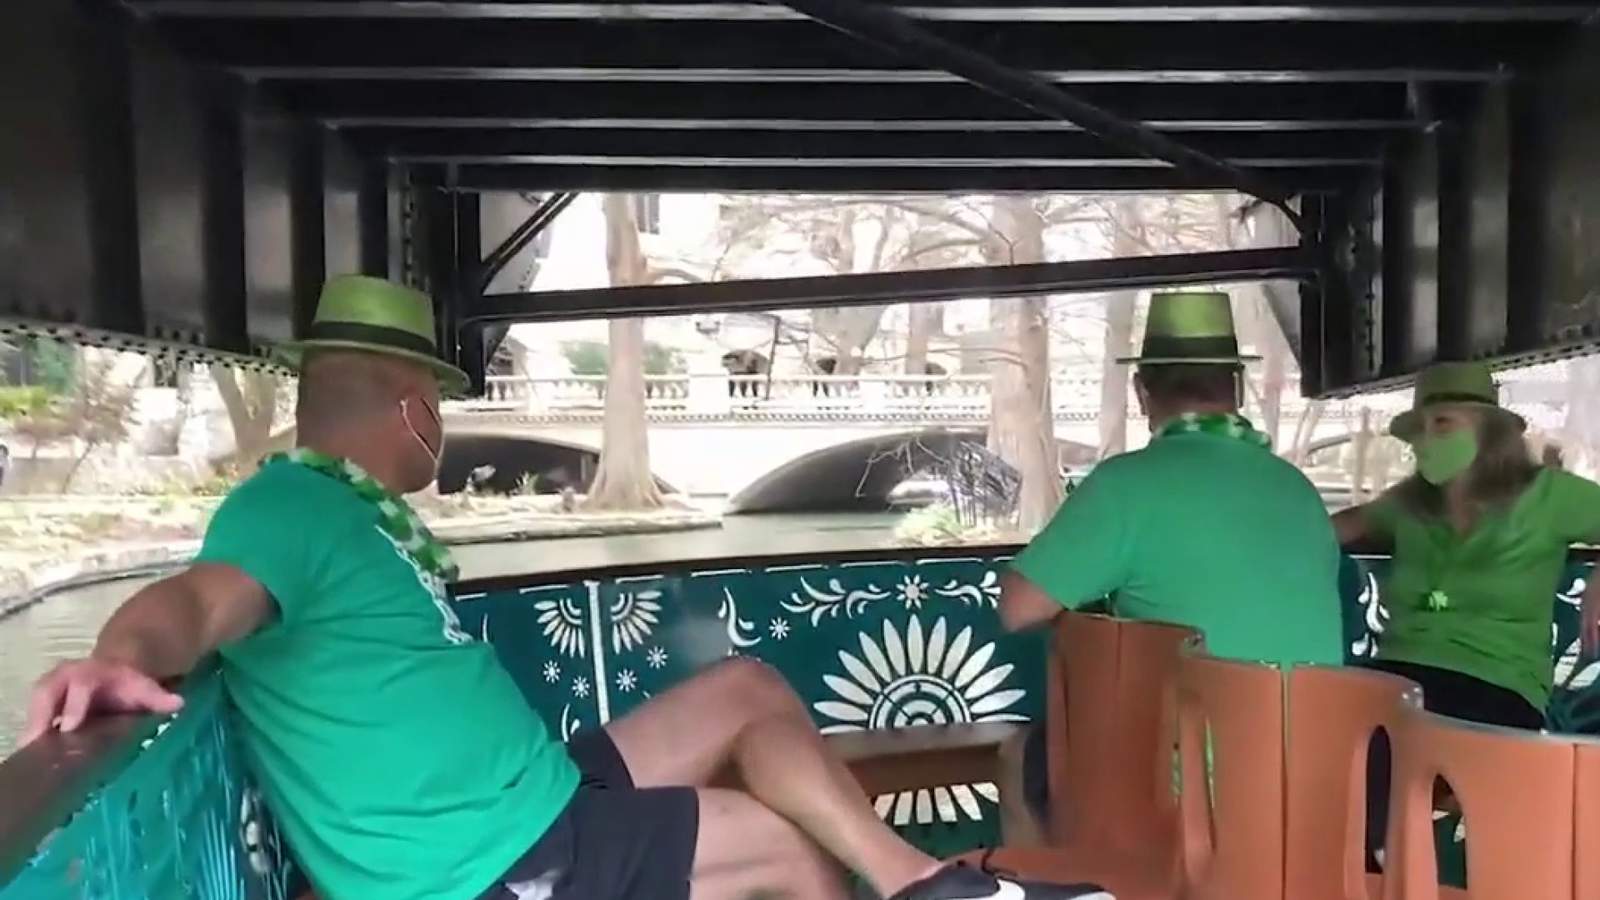 Here’s how San Antonio is celebrating St. Patrick’s Day this year